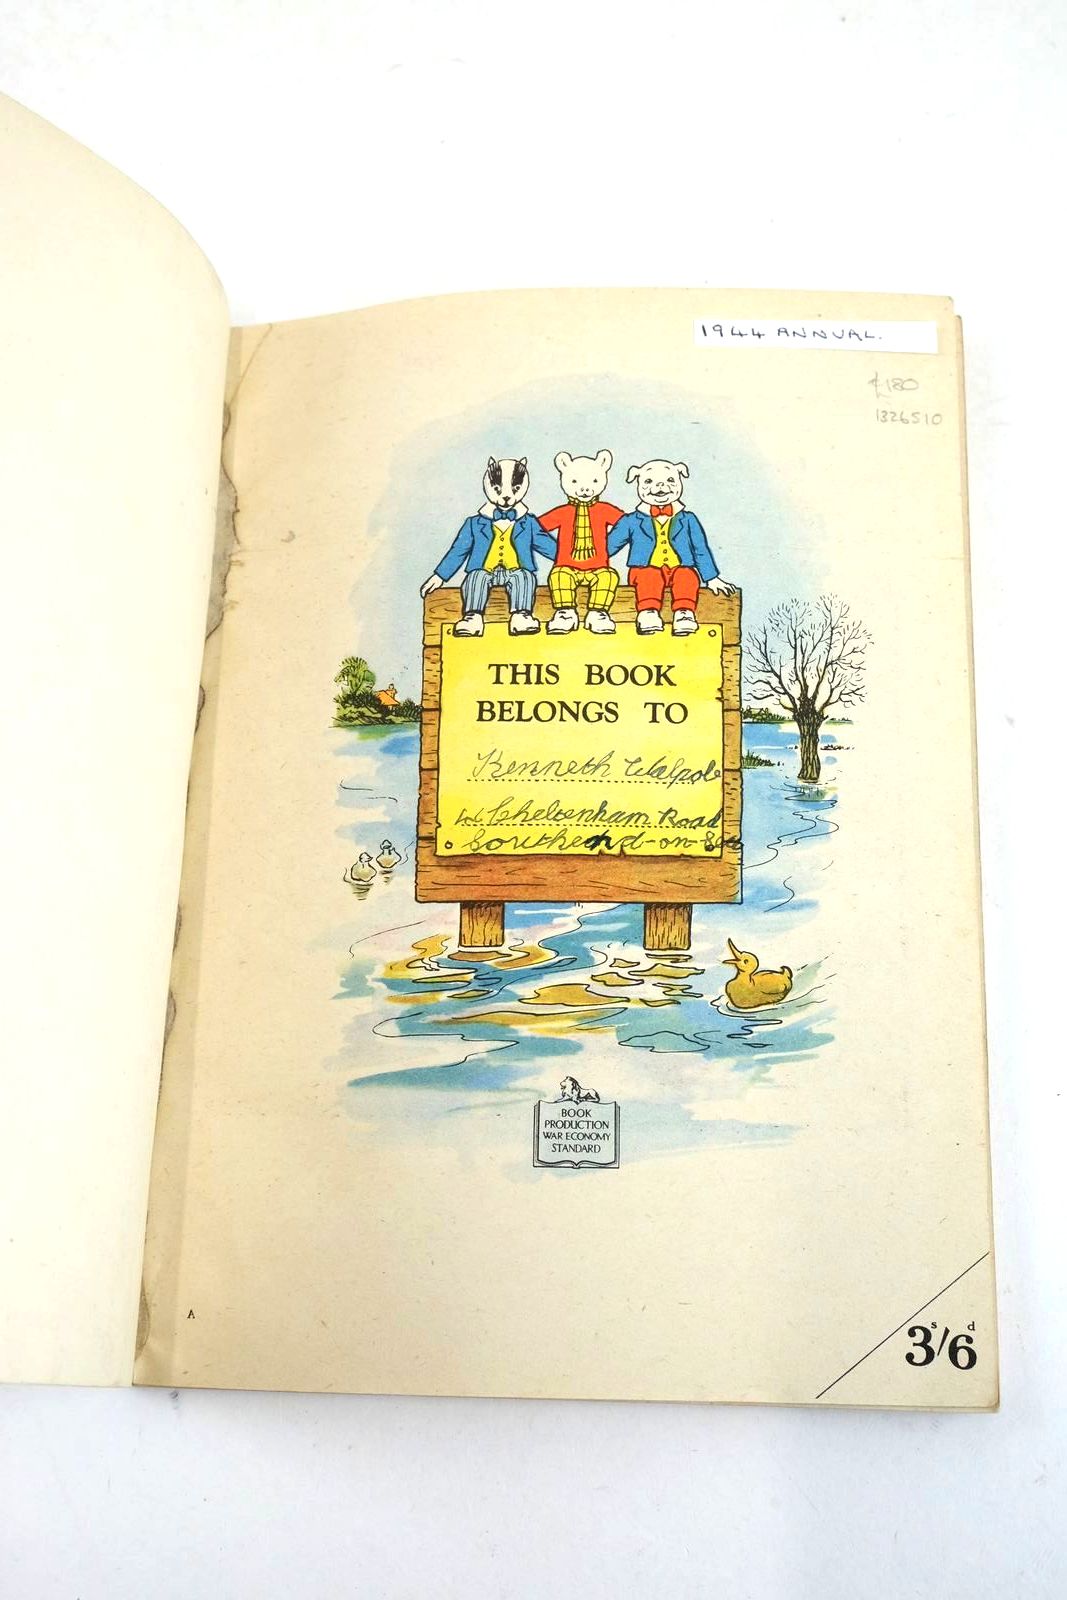 Photo of RUPERT ANNUAL 1944 - RUPERT IN MORE ADVENTURES written by Bestall, Alfred illustrated by Bestall, Alfred published by Daily Express (STOCK CODE: 1326510)  for sale by Stella & Rose's Books